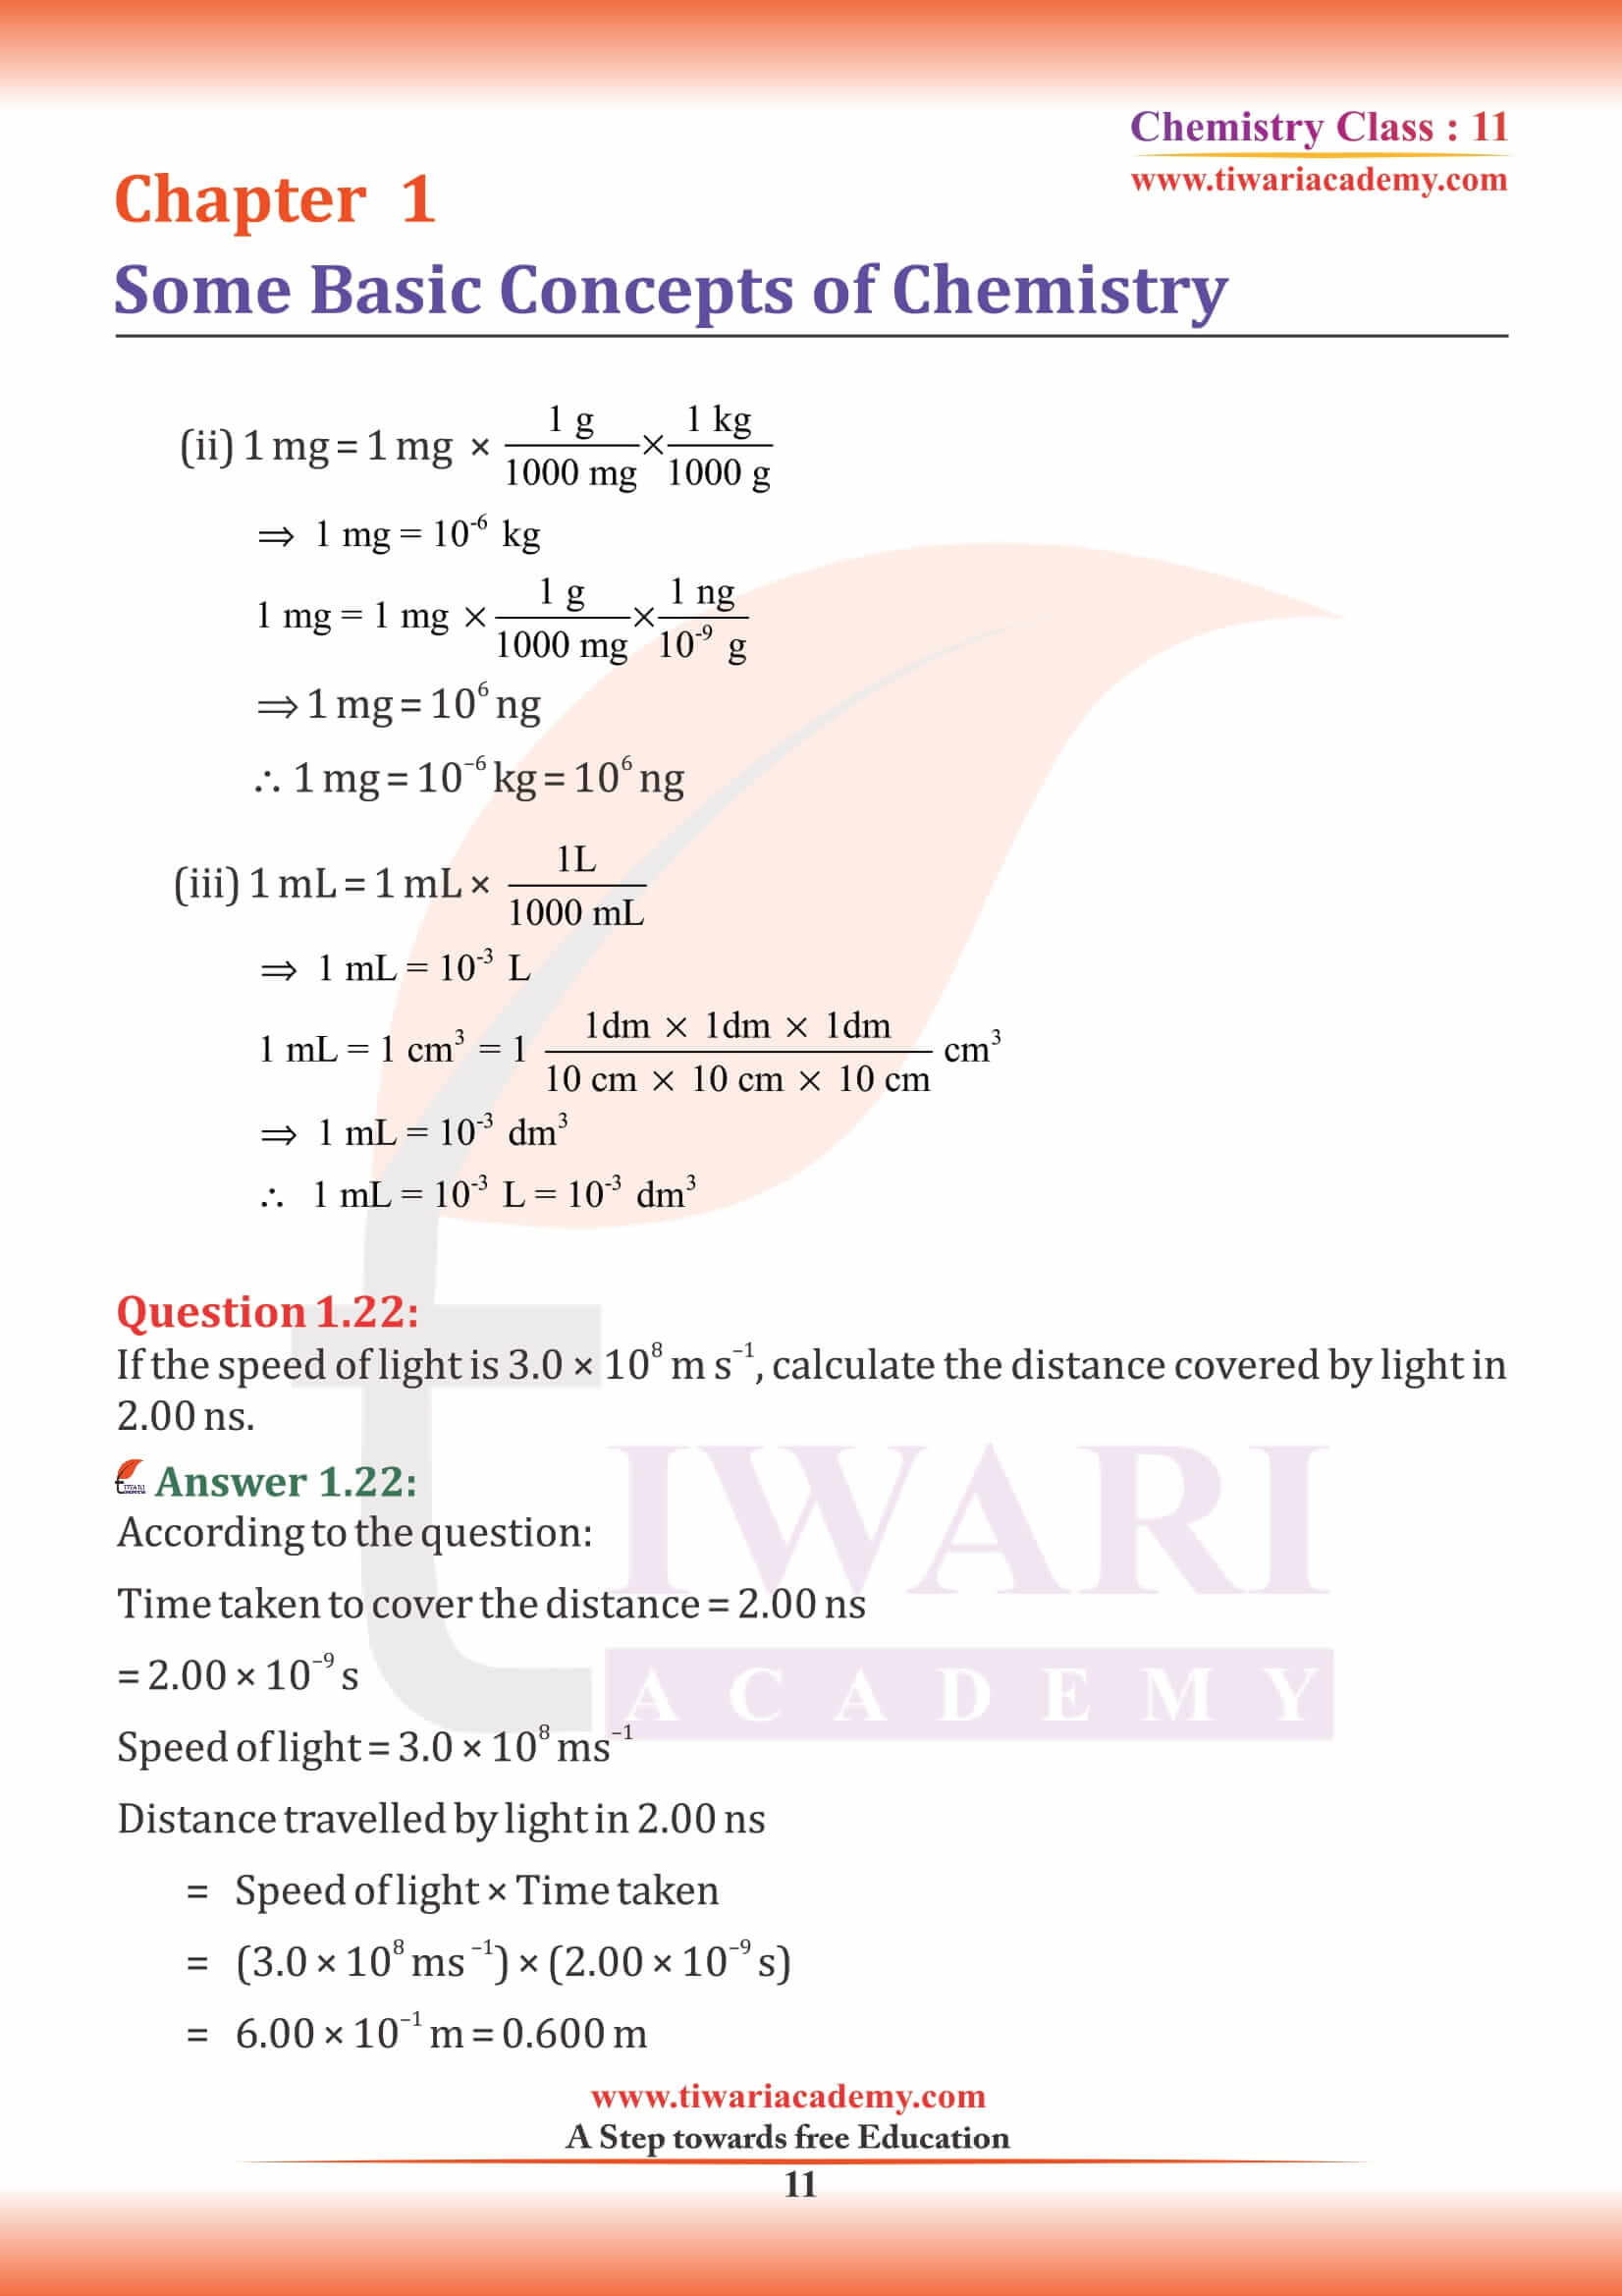 Class 11 Chemistry Chapter 1 all question answers